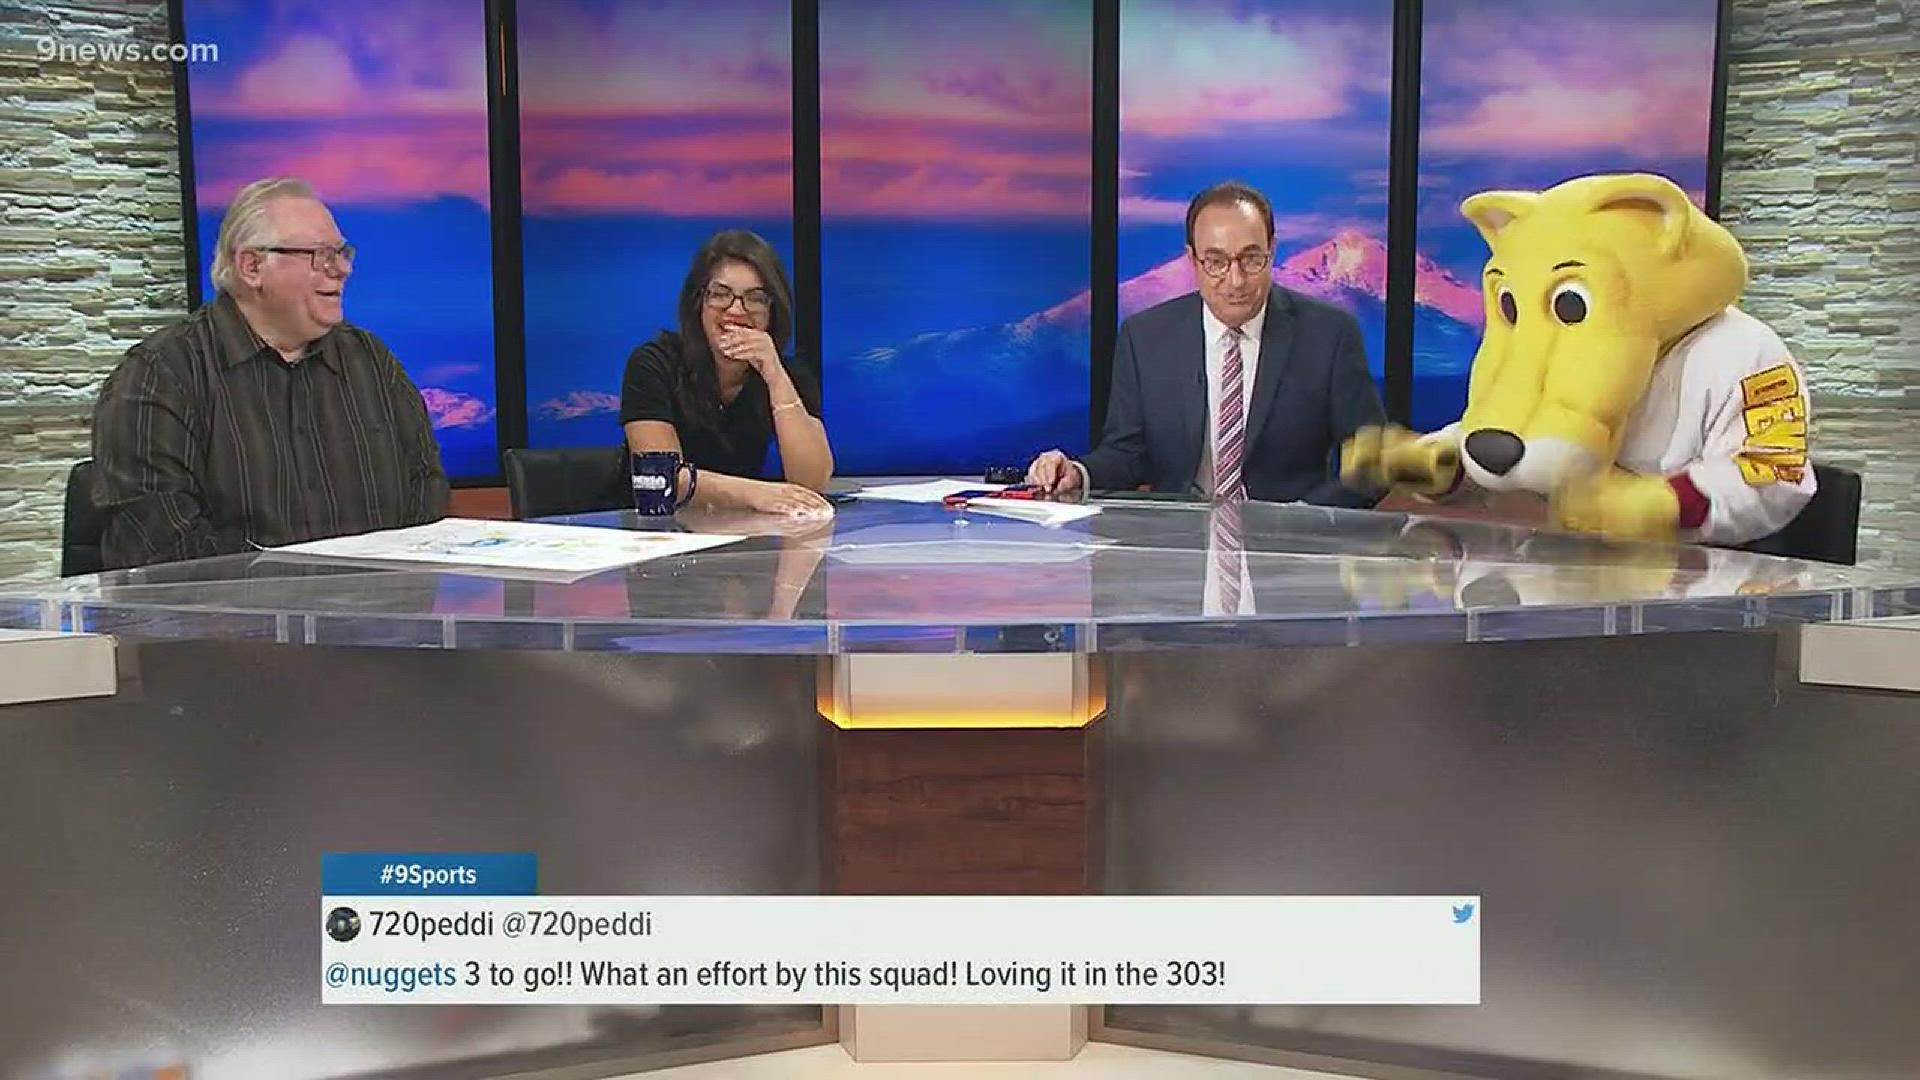 Rocky, the Denver Nuggets mascot, stopped by 9NEWS to get the team excited ahead of game 3 in the playoff series against the Portland Trailblazers.